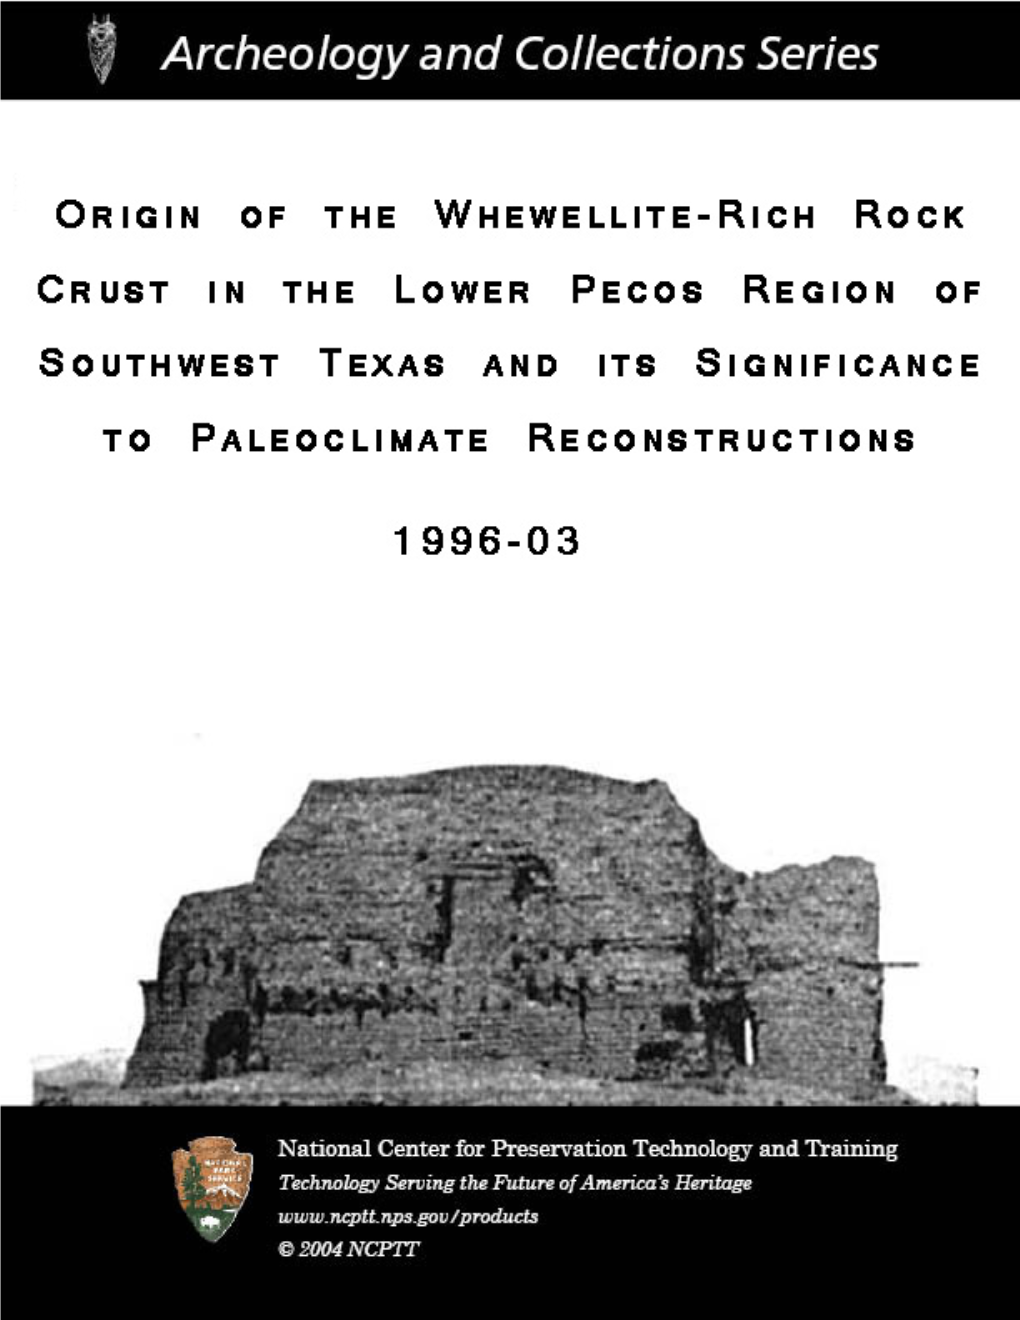 Origin of the Whewellite-Rich Rock Crust in the Lower Pecos Region of Southwest Texas and Its Significance to Paleoclimate Reconstructions